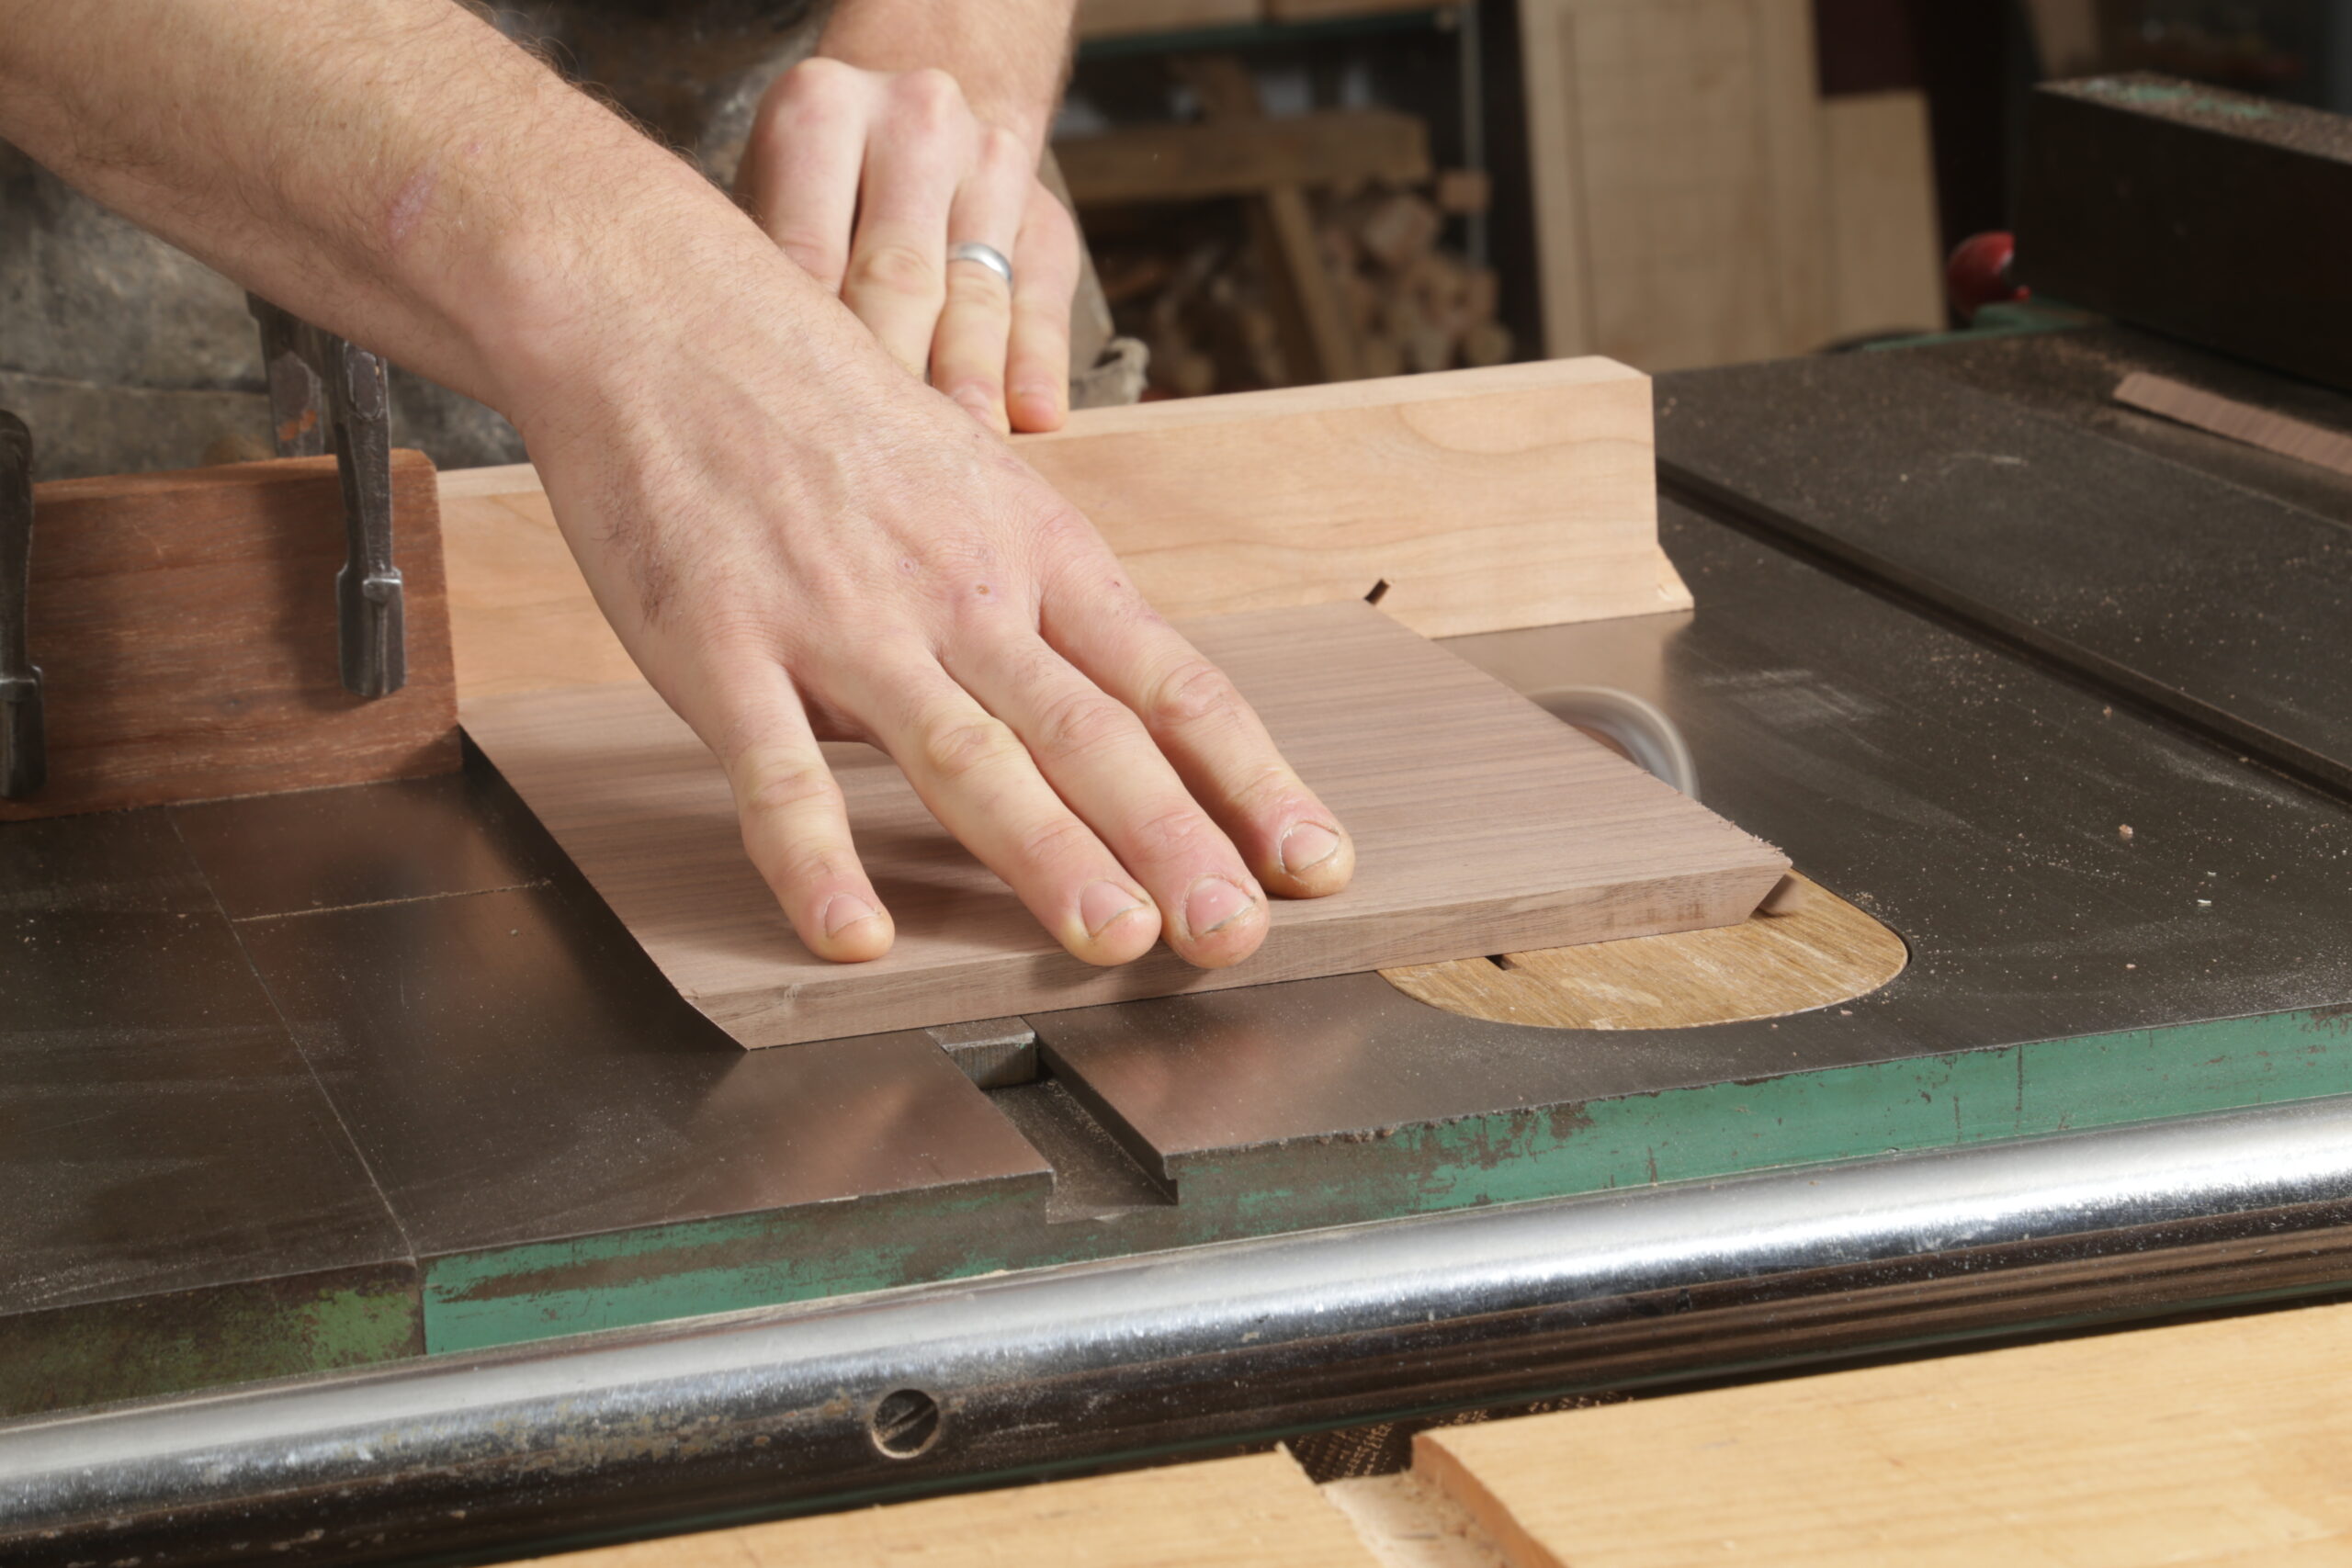 At the tablesaw, a tight shot of cutting thin a walnut board to 45° on one end. The other end has already been cut.